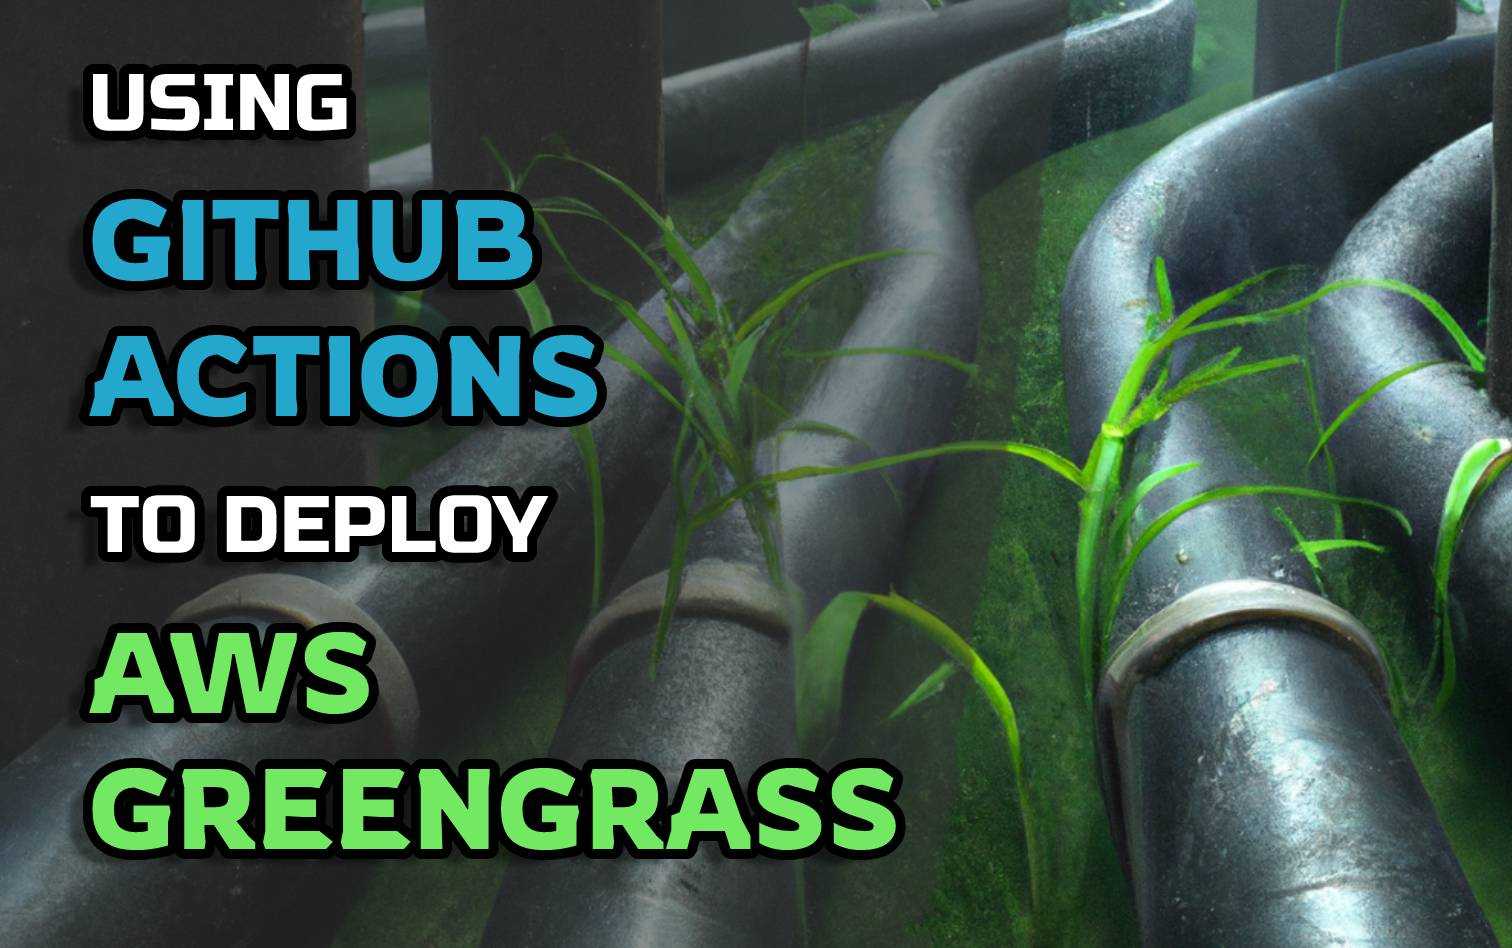 Using GitHub Actions for Greengrass v2 Continuous Deployment